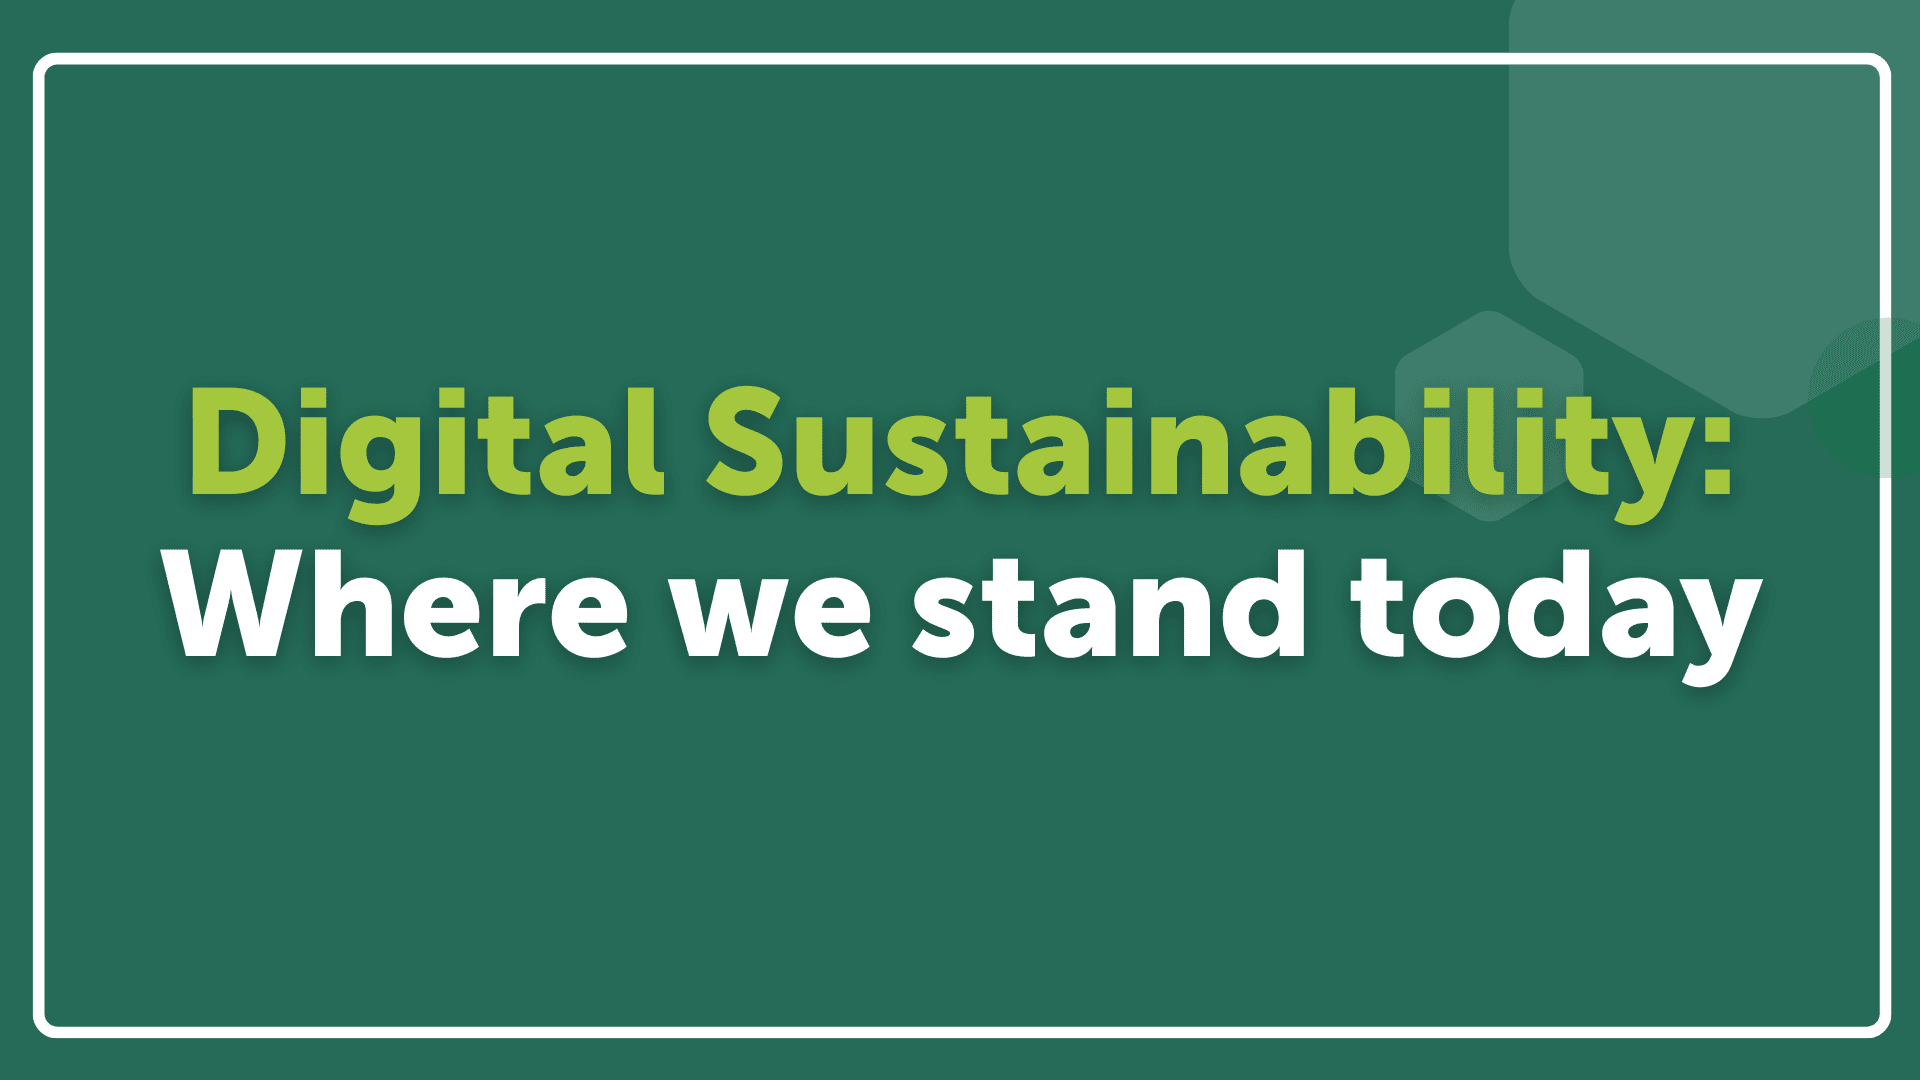 Digital Sustainability: Where we stand today